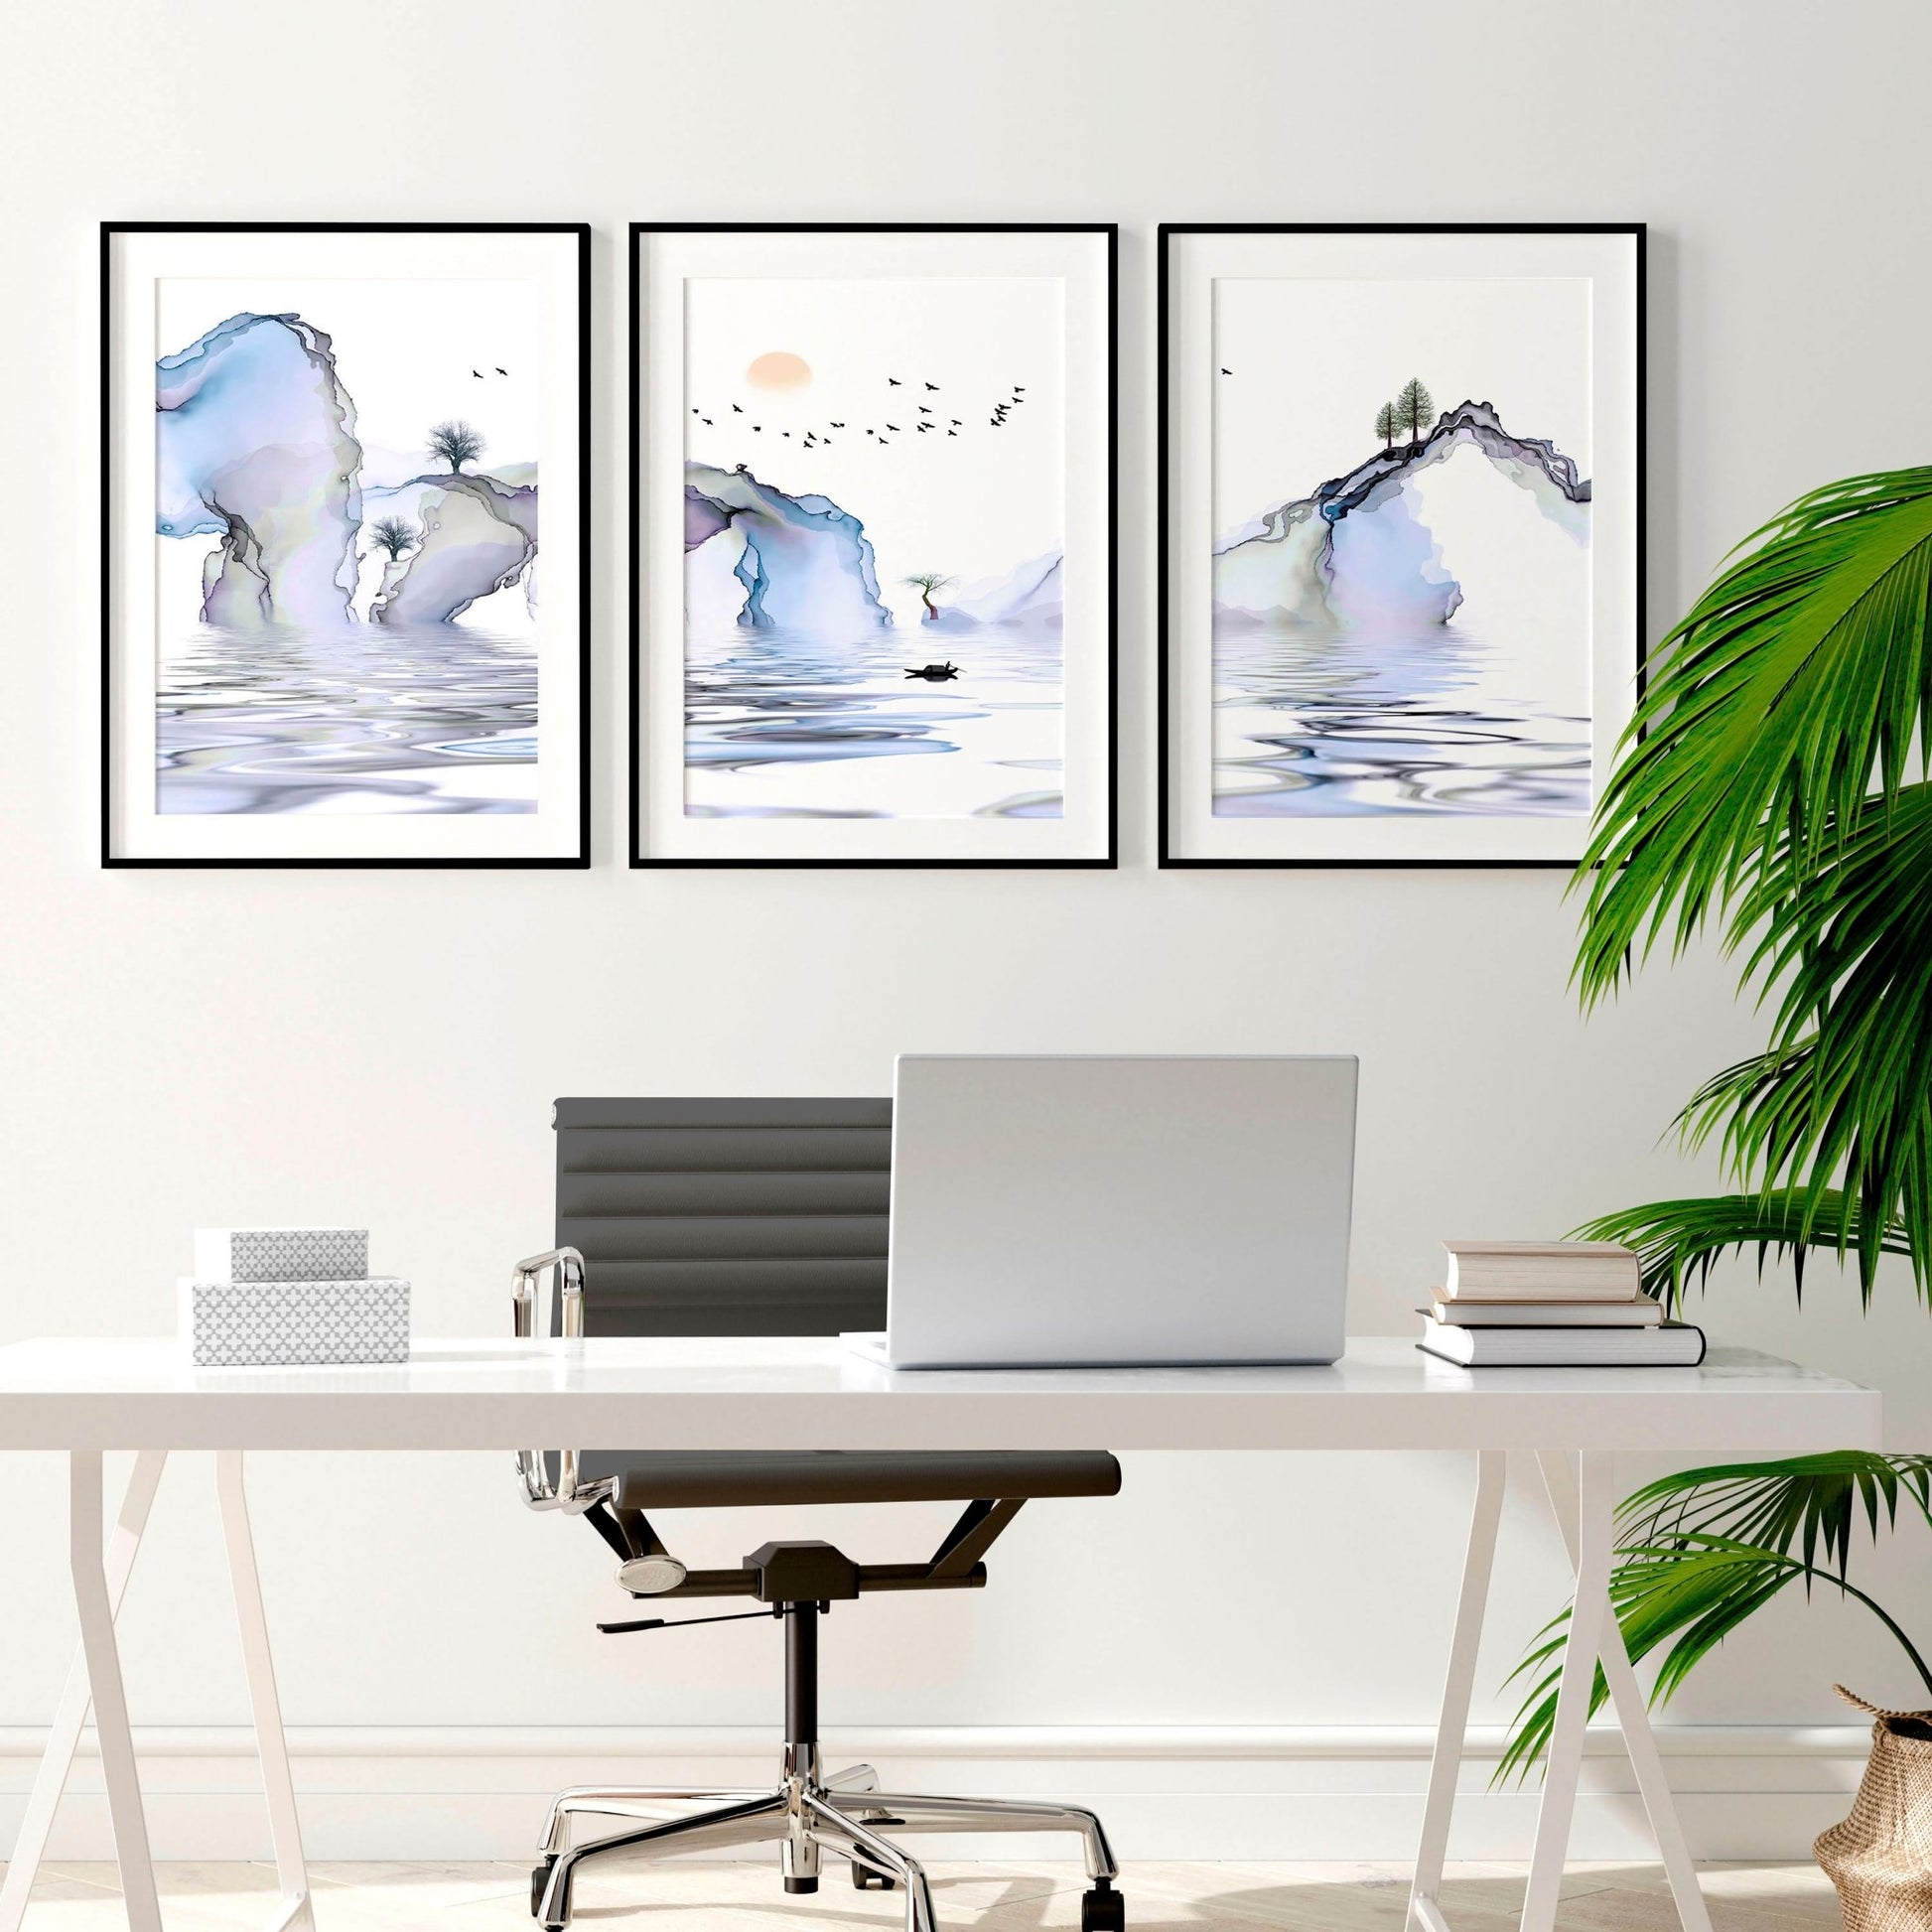 Designer painting for wall | set of 3 wall art prints for office - About Wall Art